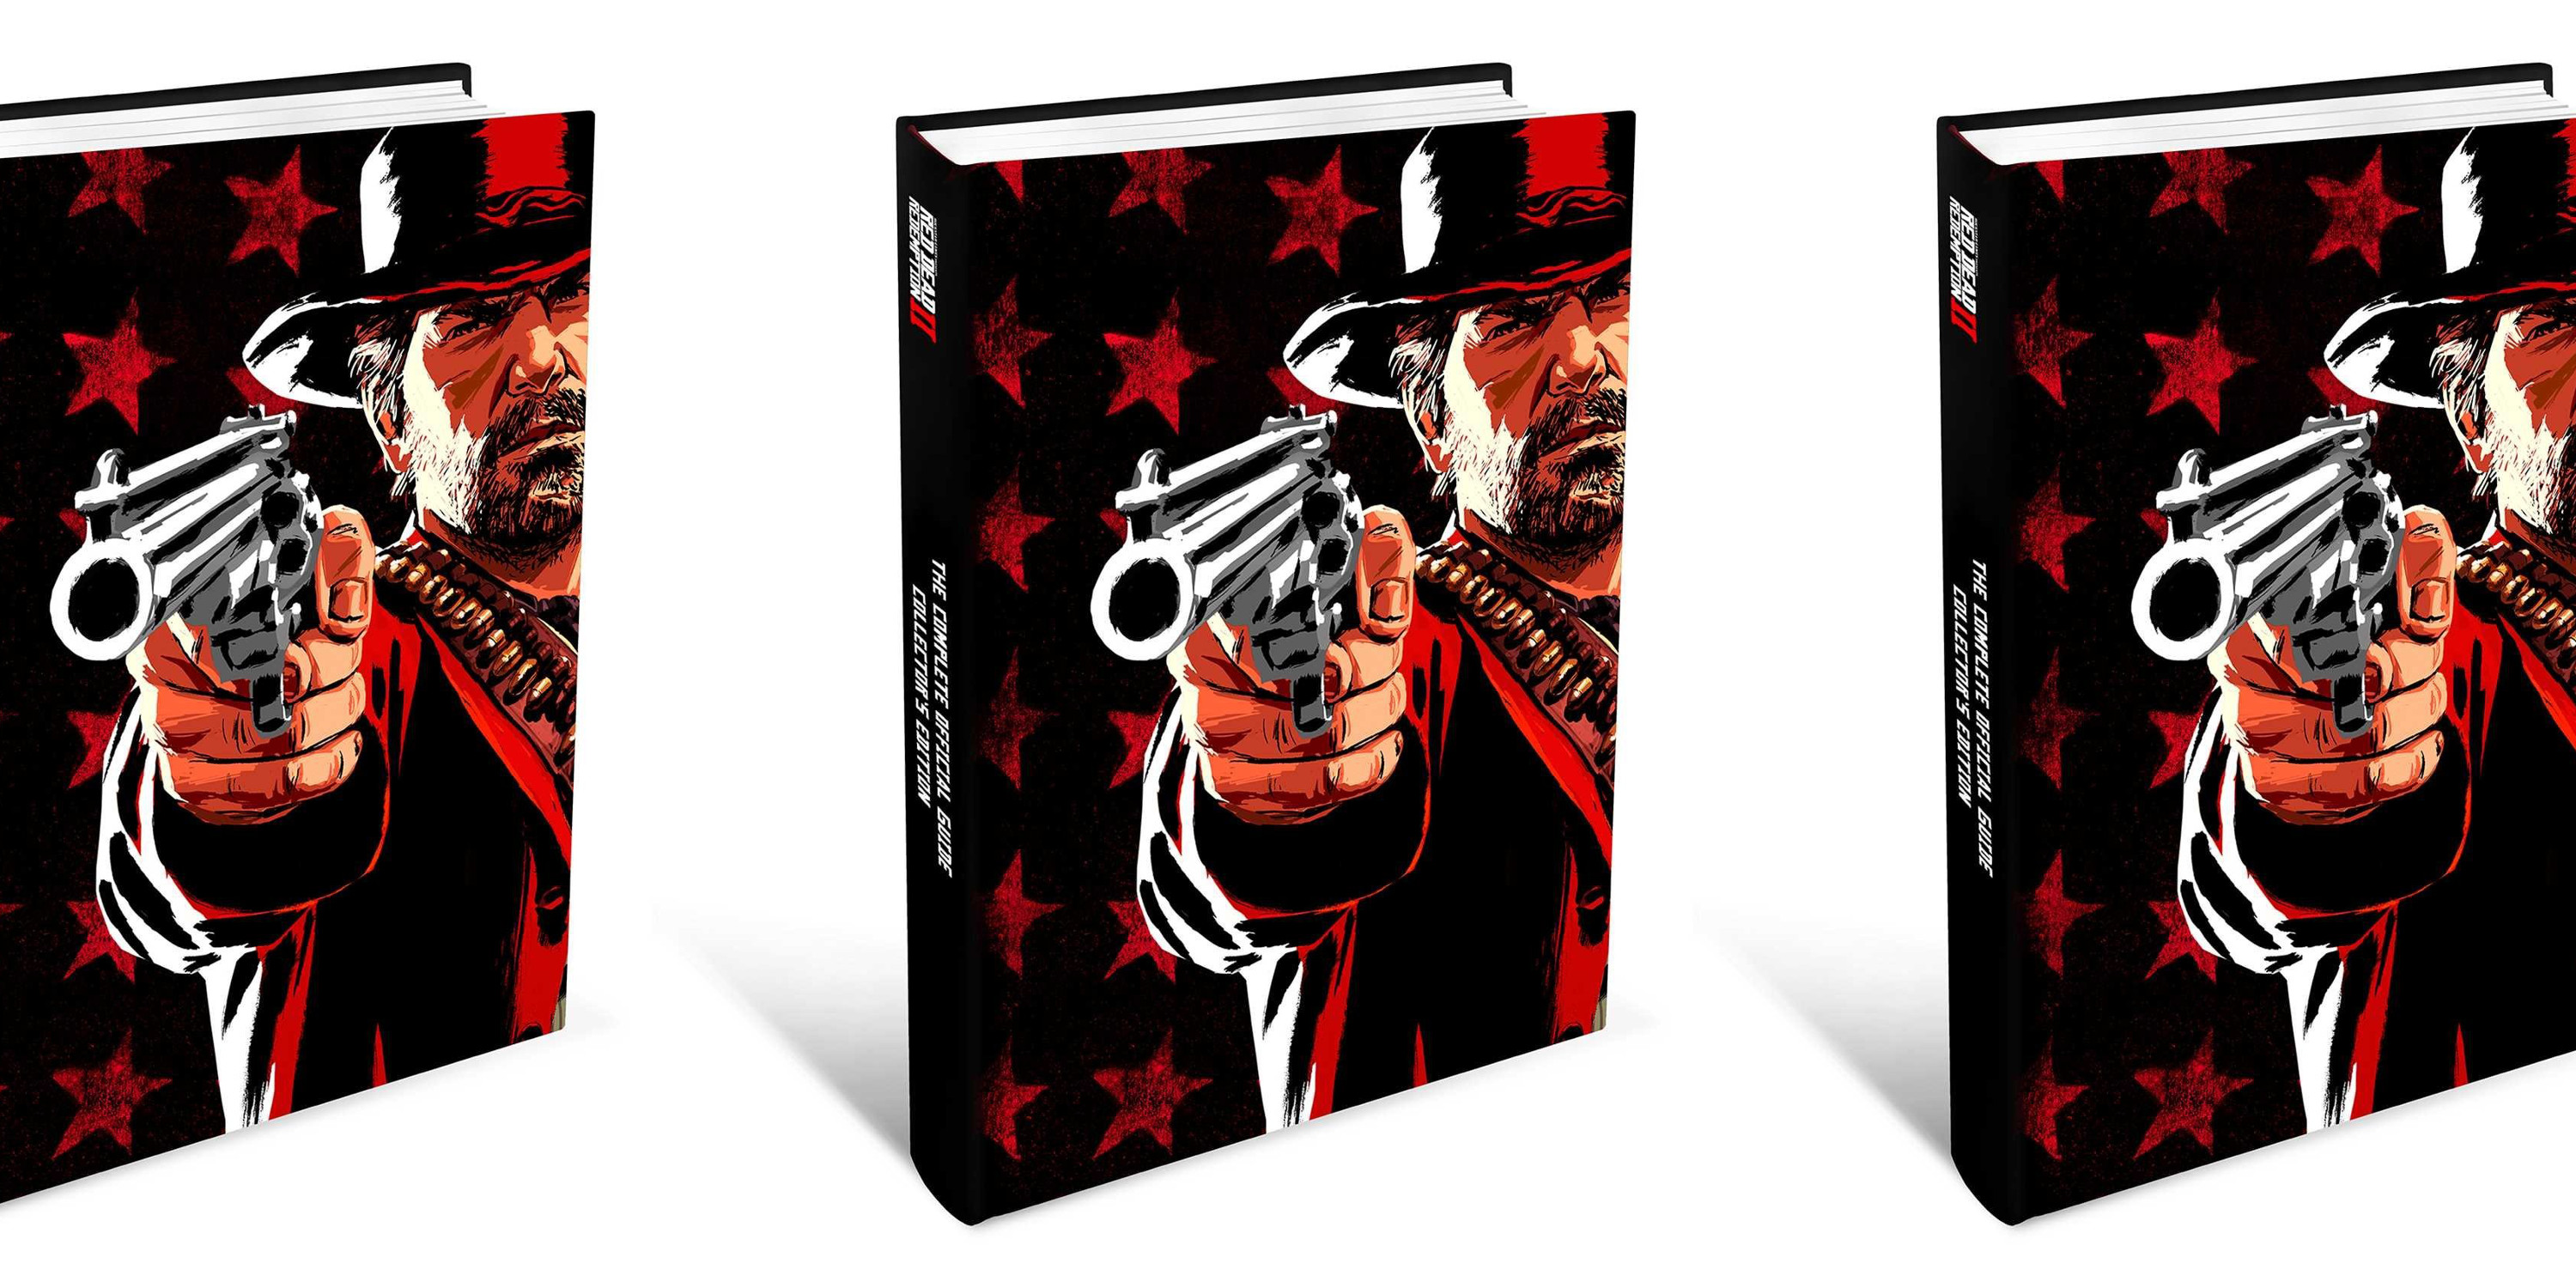 Maladroit kobling Rute Red Dead Redemption 2 official hardcover game guide at all-time low: $24  (Reg. $30+)